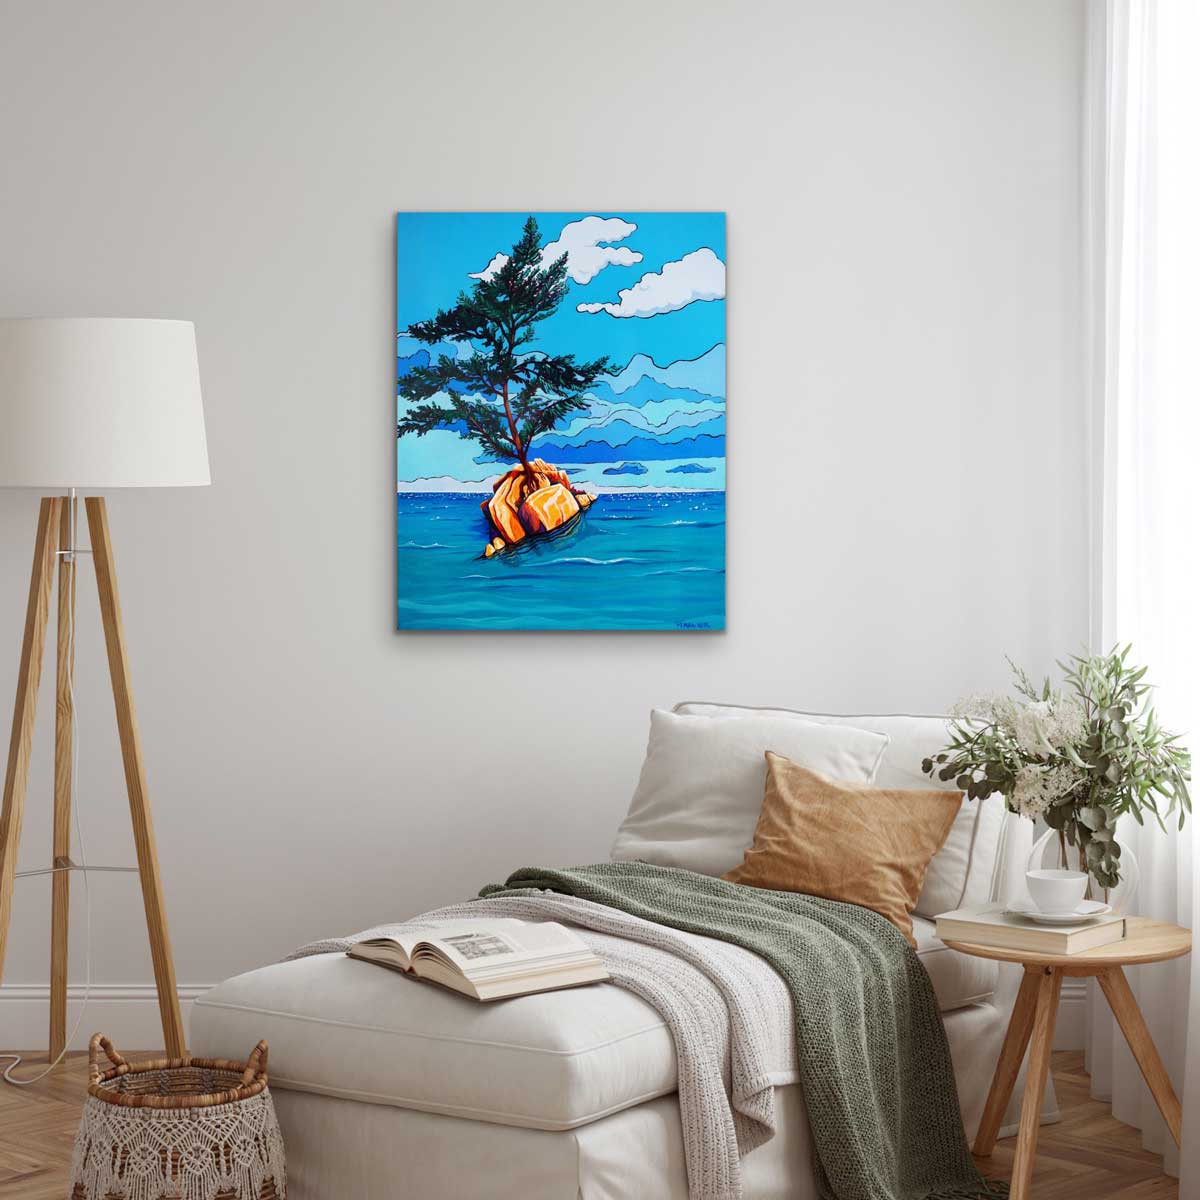 Dream scene from a tree on its own rocky island pretending to be a sail boat on the glorious Atlantic Sea. Original painting by a professional Canadian landscape artist. visual art ready to hang on your wall.